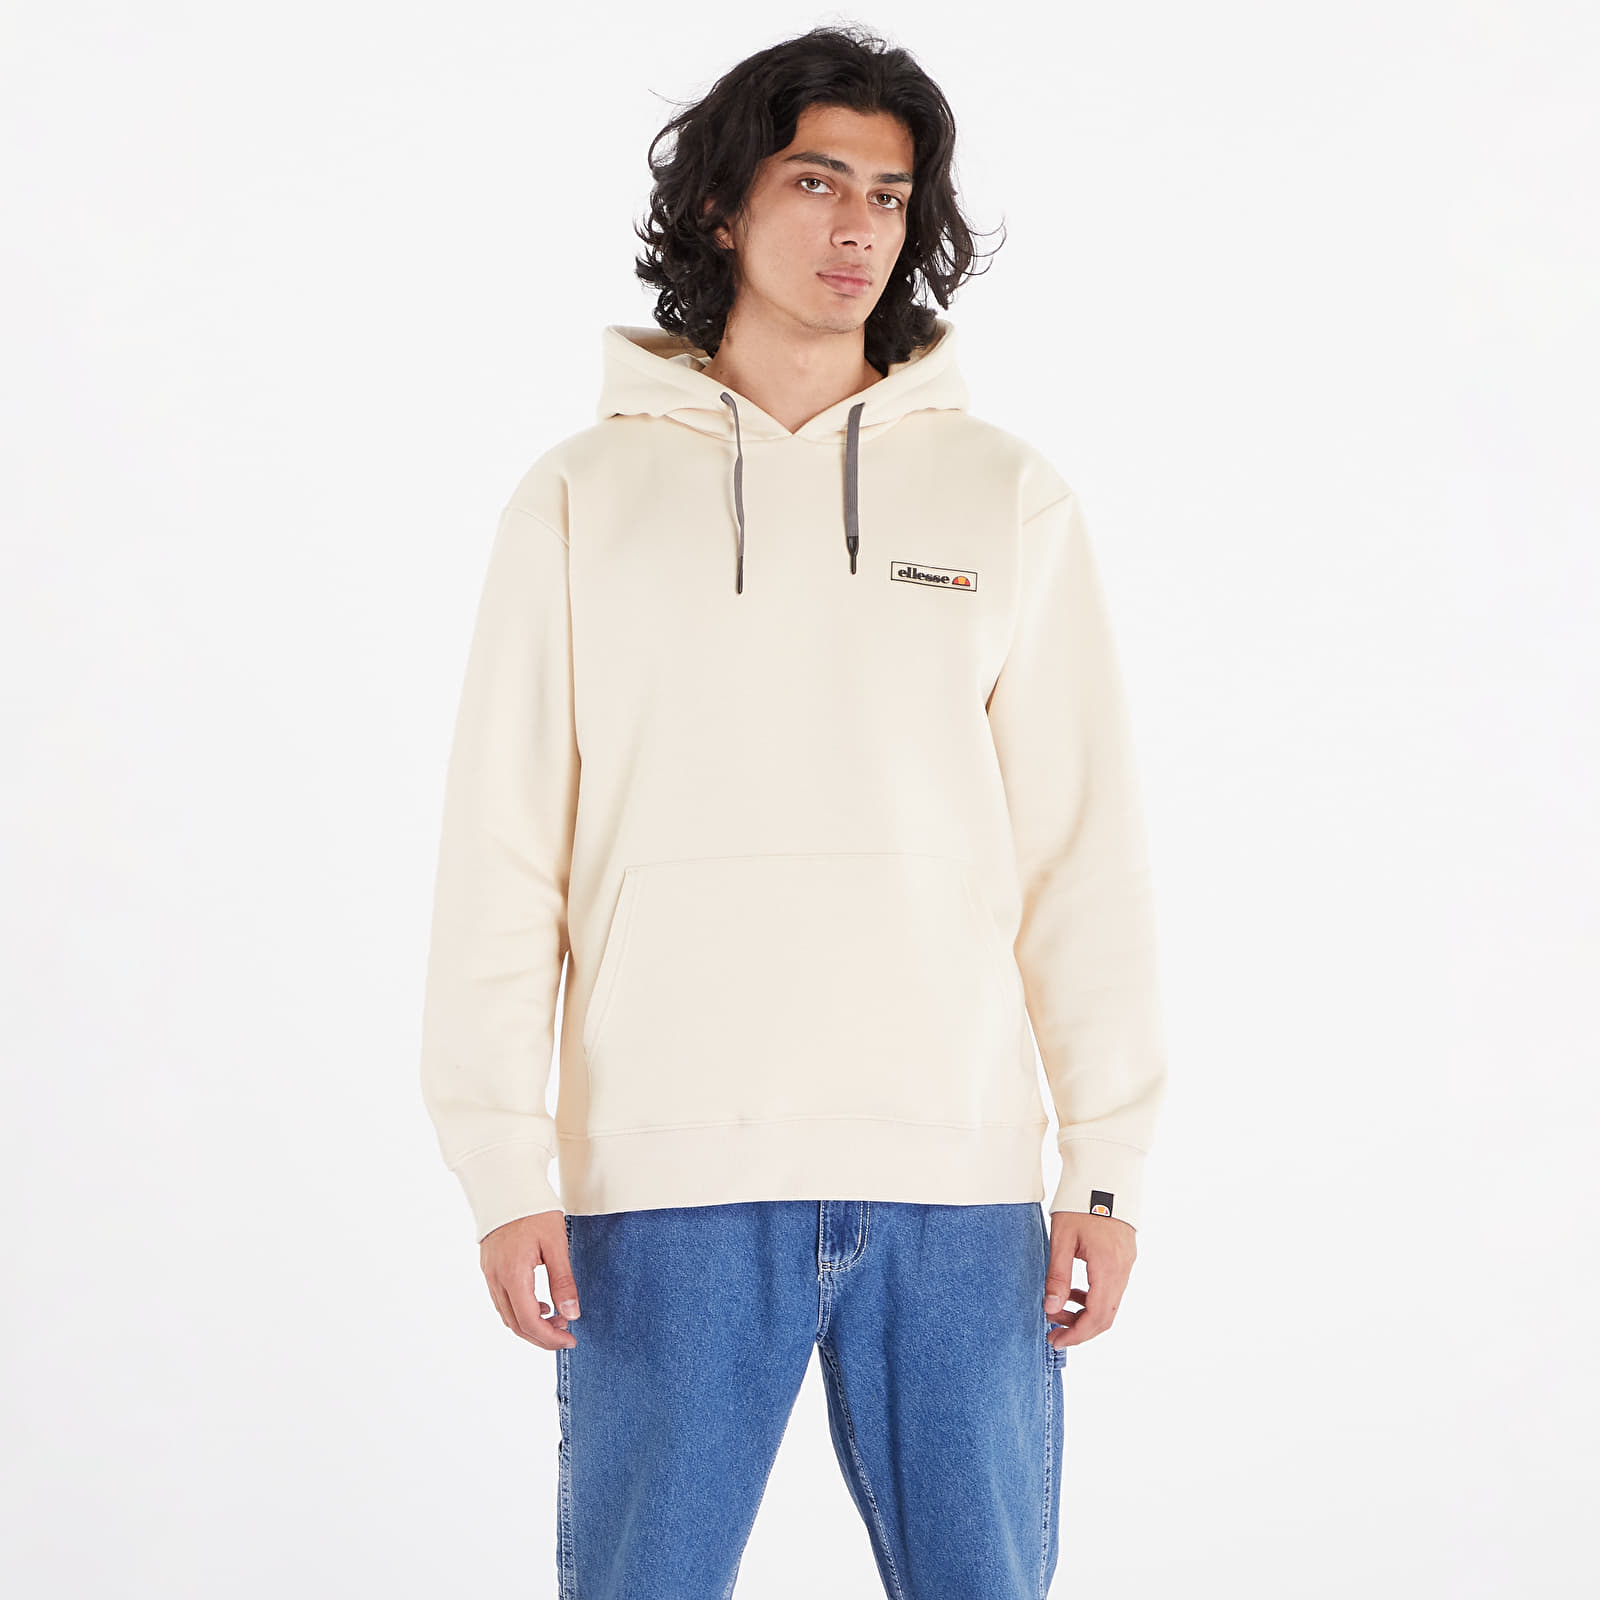 Ellesse - perucci oh hoody off white